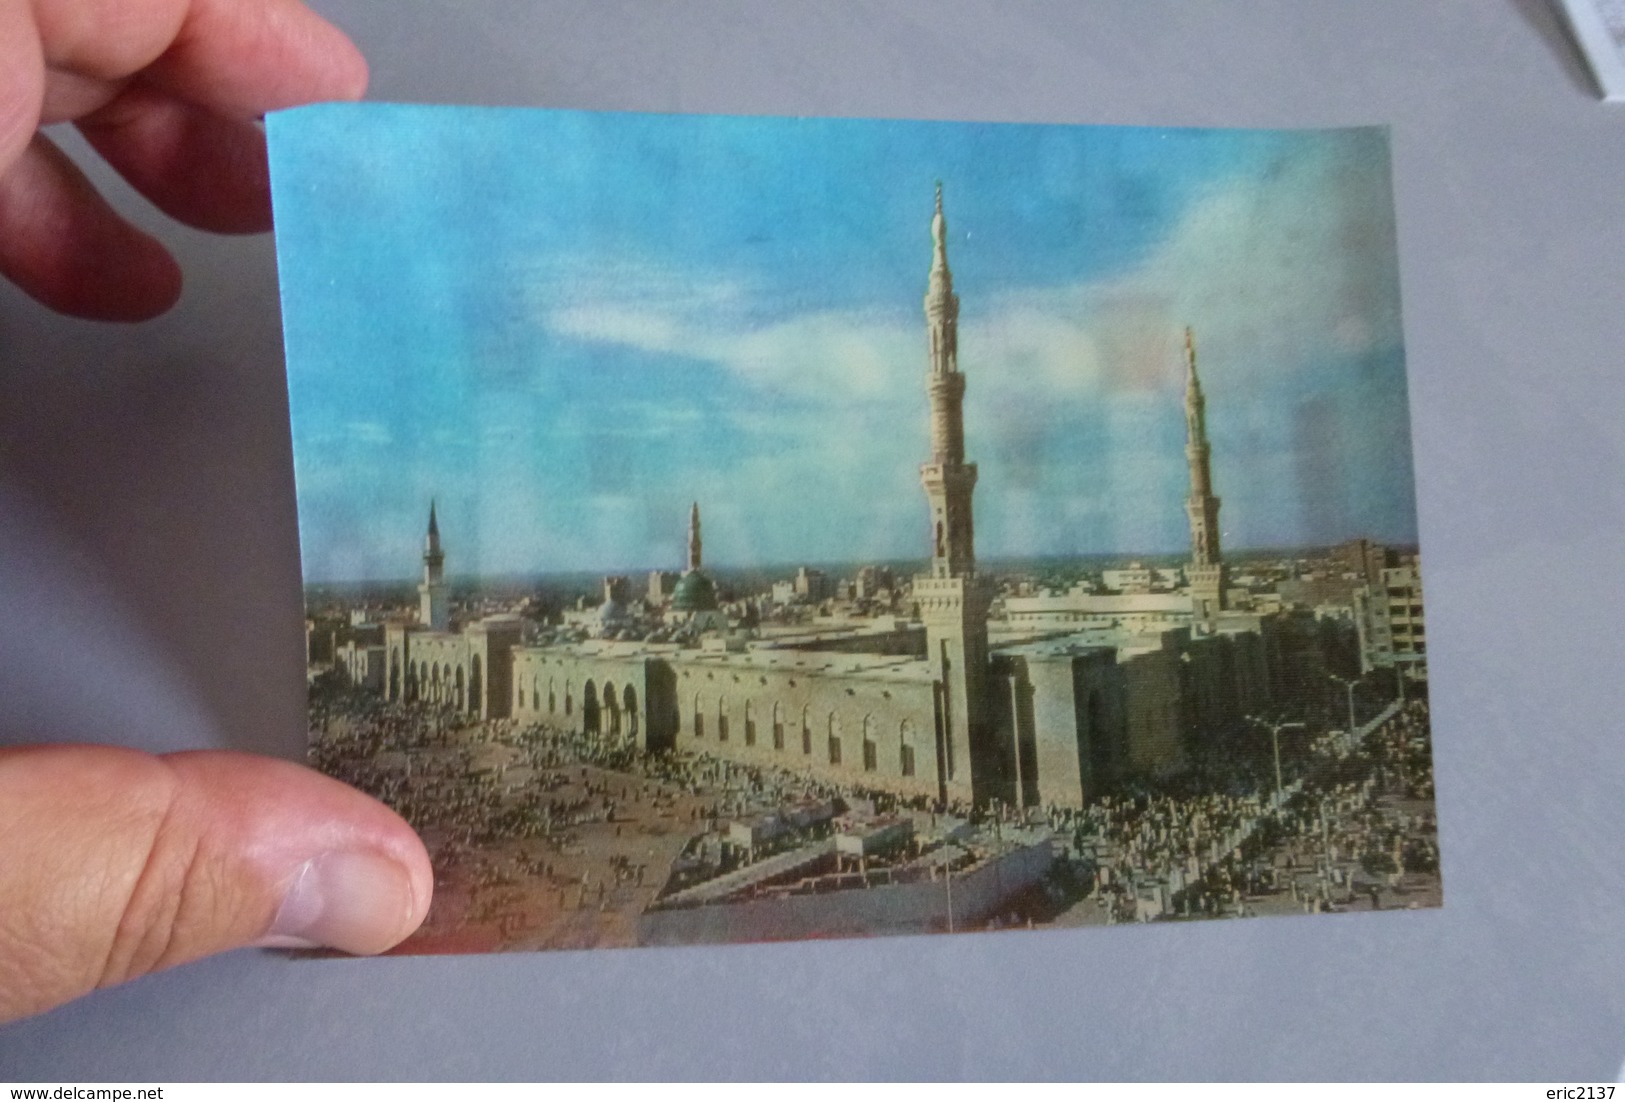 BELLE CARTE 3D VISIO RELIEF ...CHANGING VIEW OF HOLY MOSQUE OF PROPHET IN MEDINA - Islam